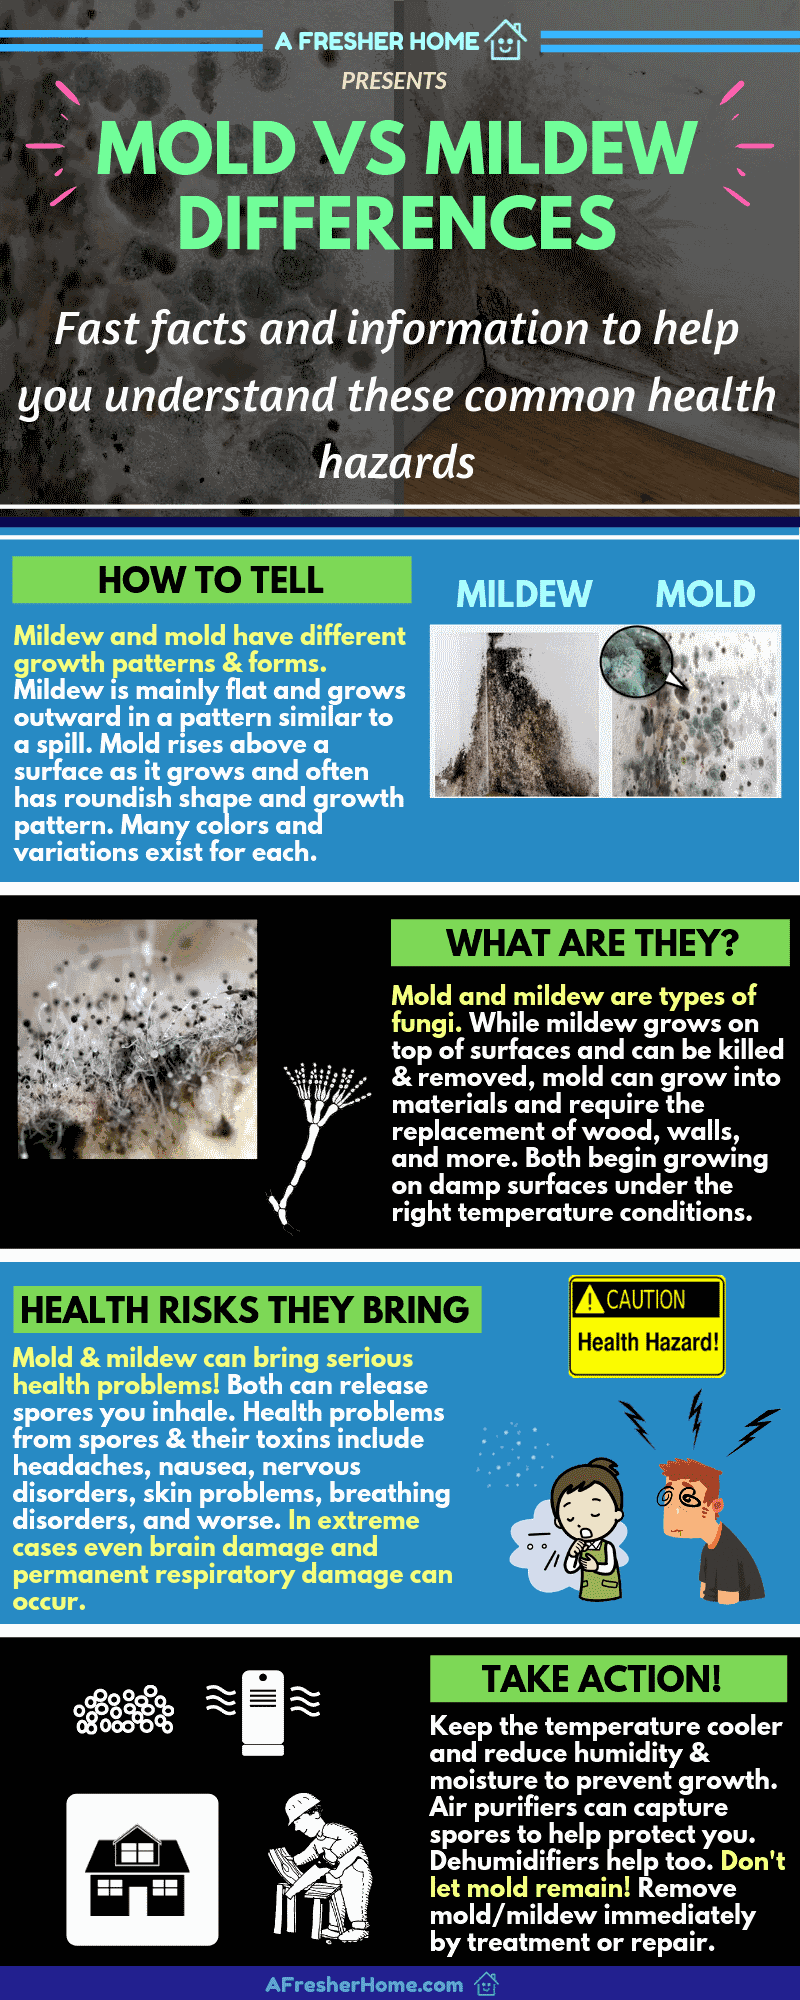 Mold vs mildew difference facts infographic guide